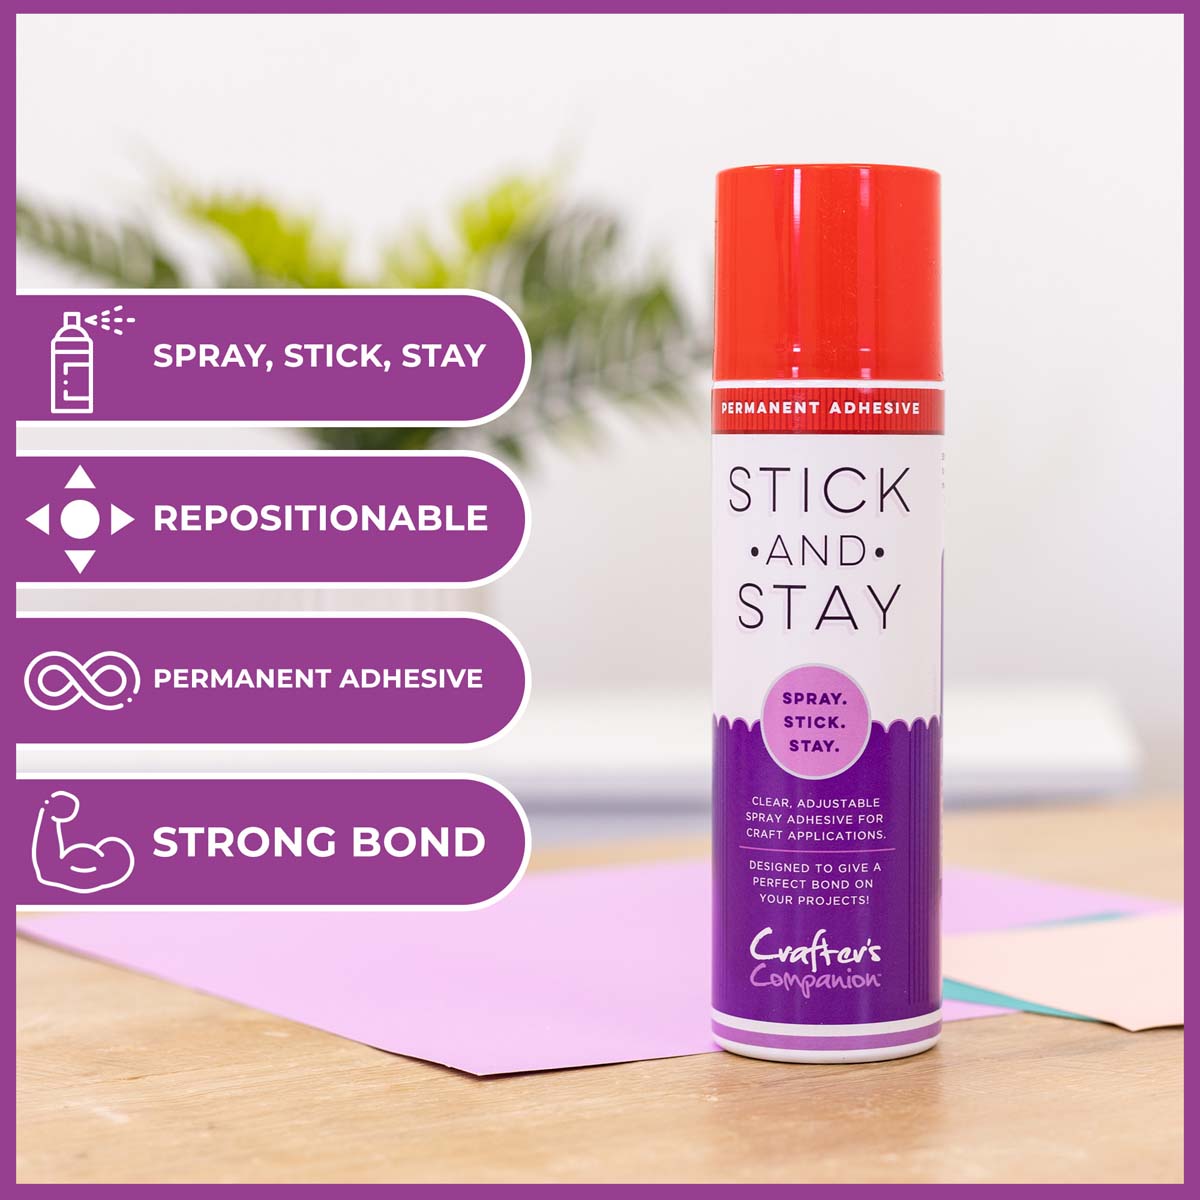 Crafter's Companion - Stick and Stay Munting Adesive (Red Can)